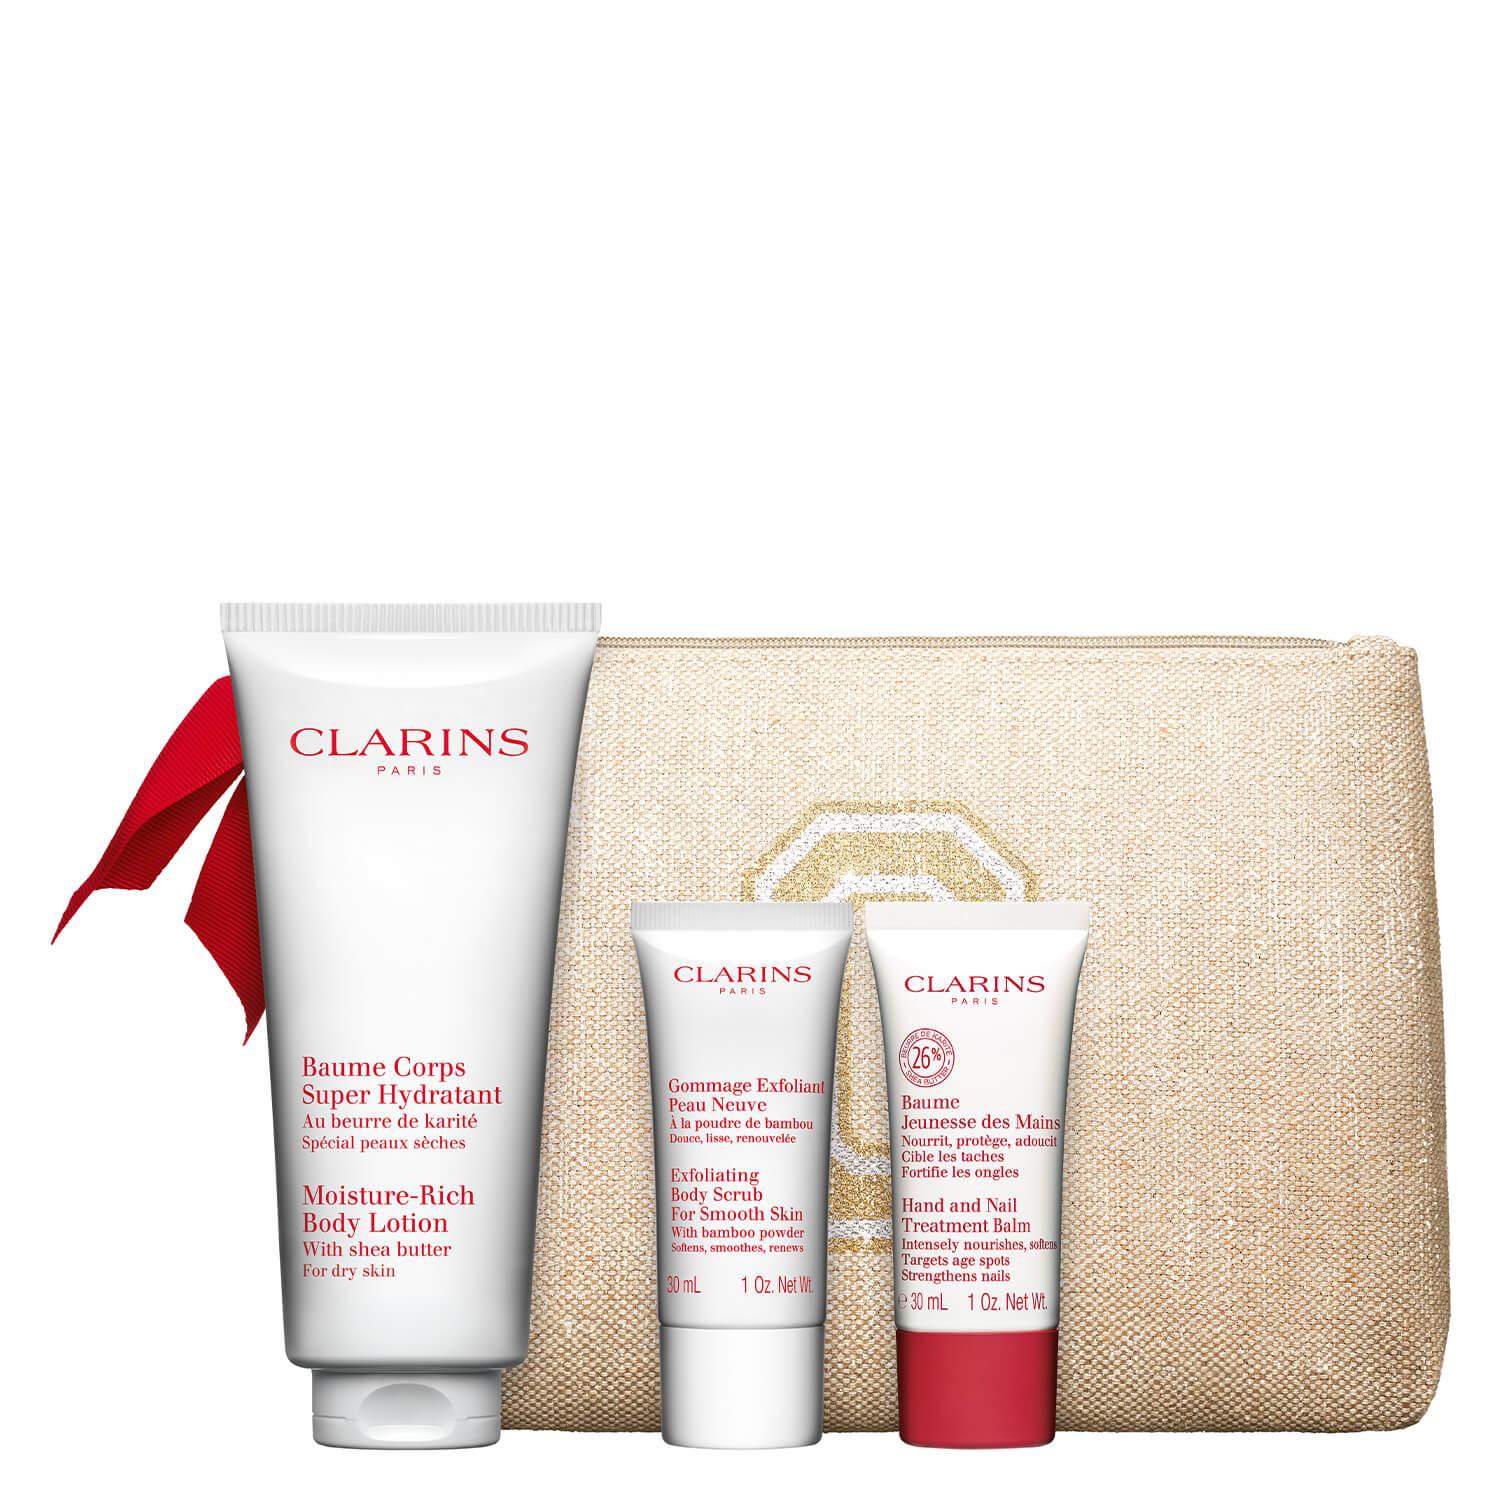 Clarins Specials - Moisture Rich Body Lotion Kit